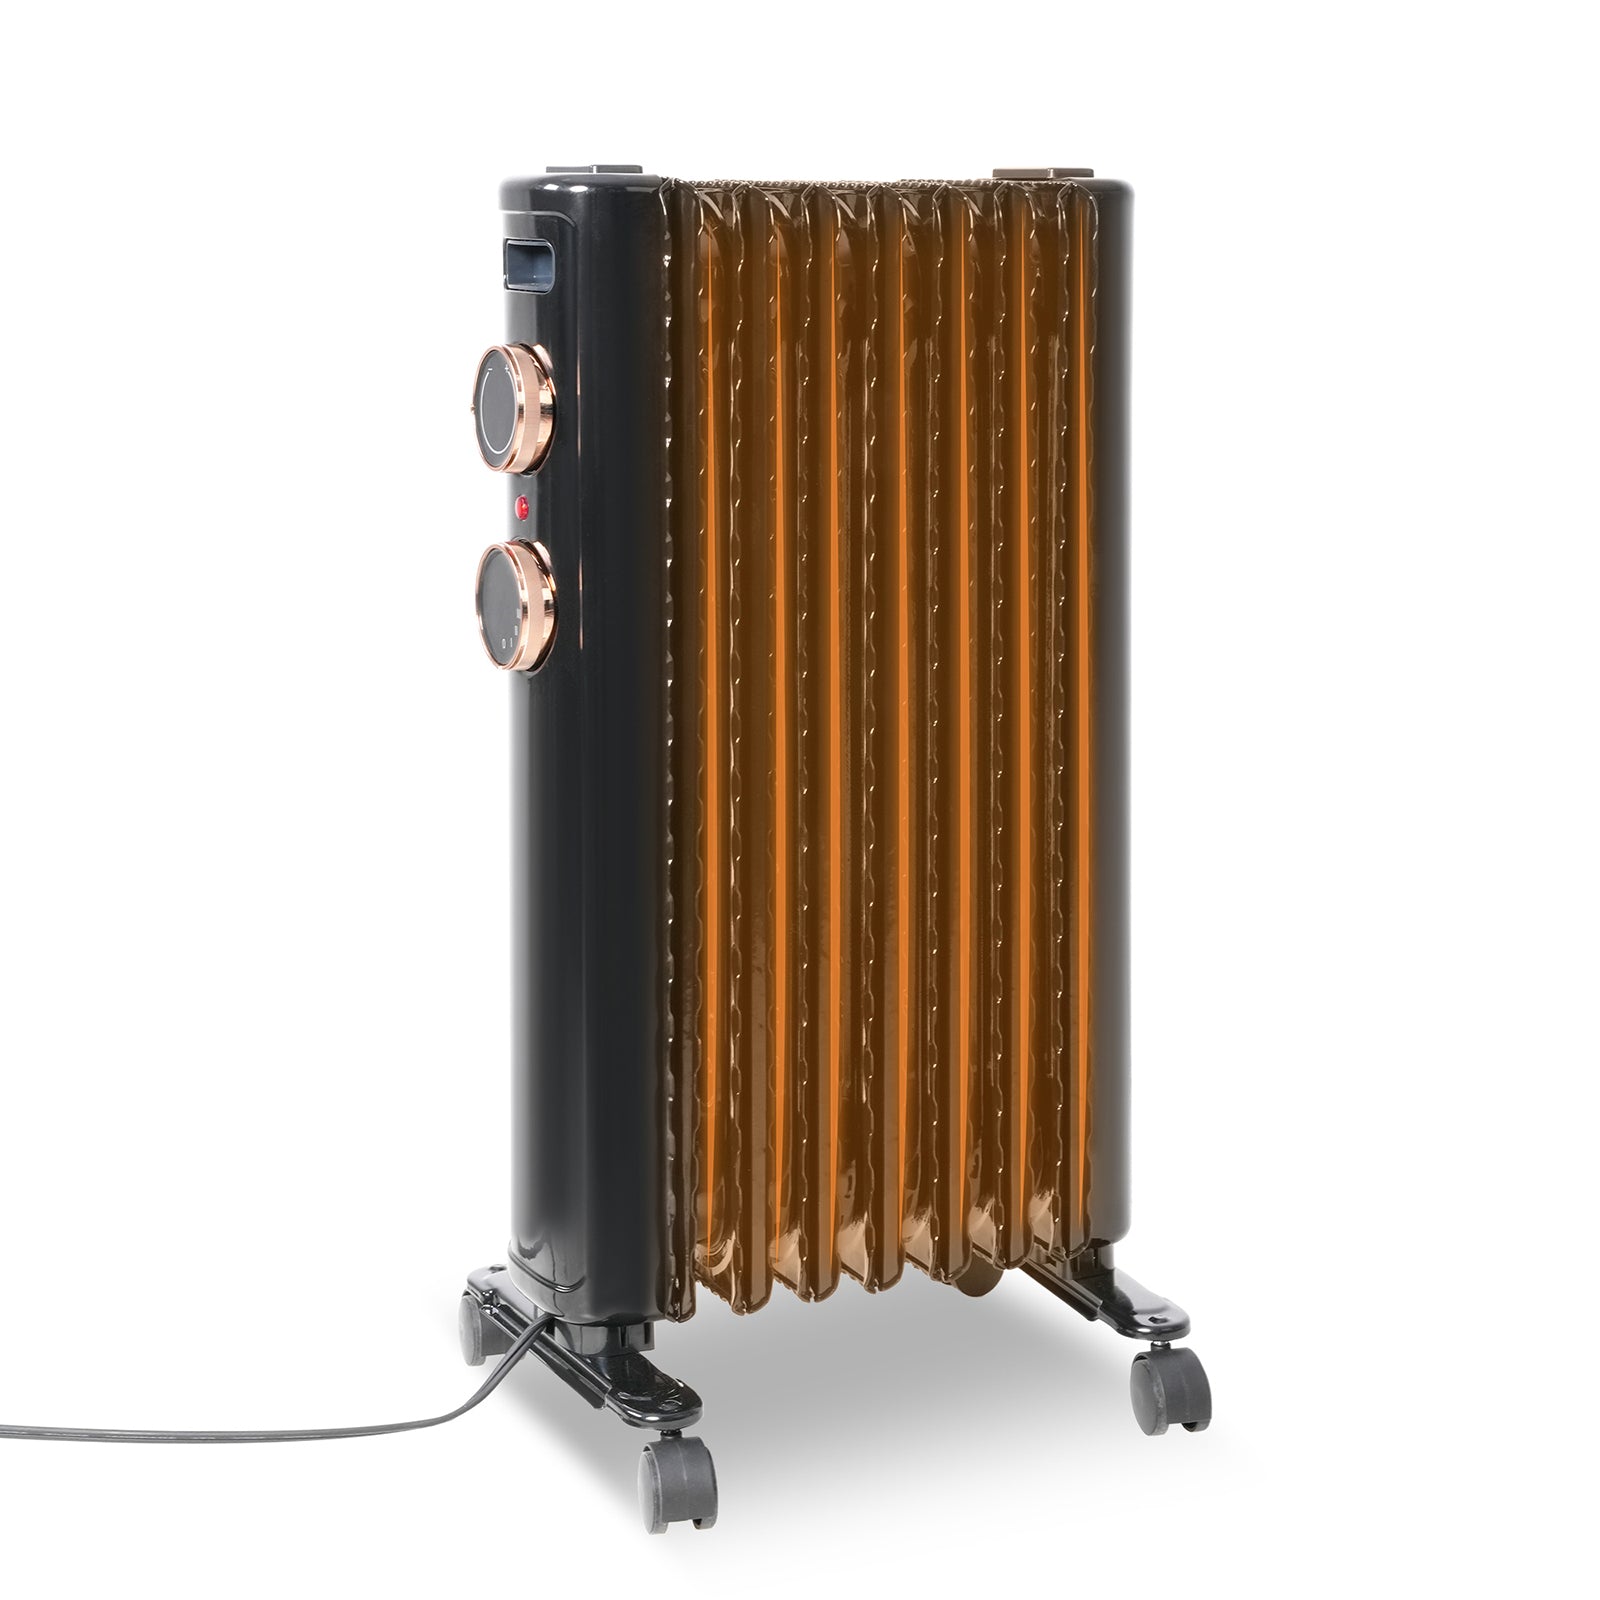 1500W Oil Filled Radiator Heater with 3 Heating Modes Portable Electric Space Heater, Black